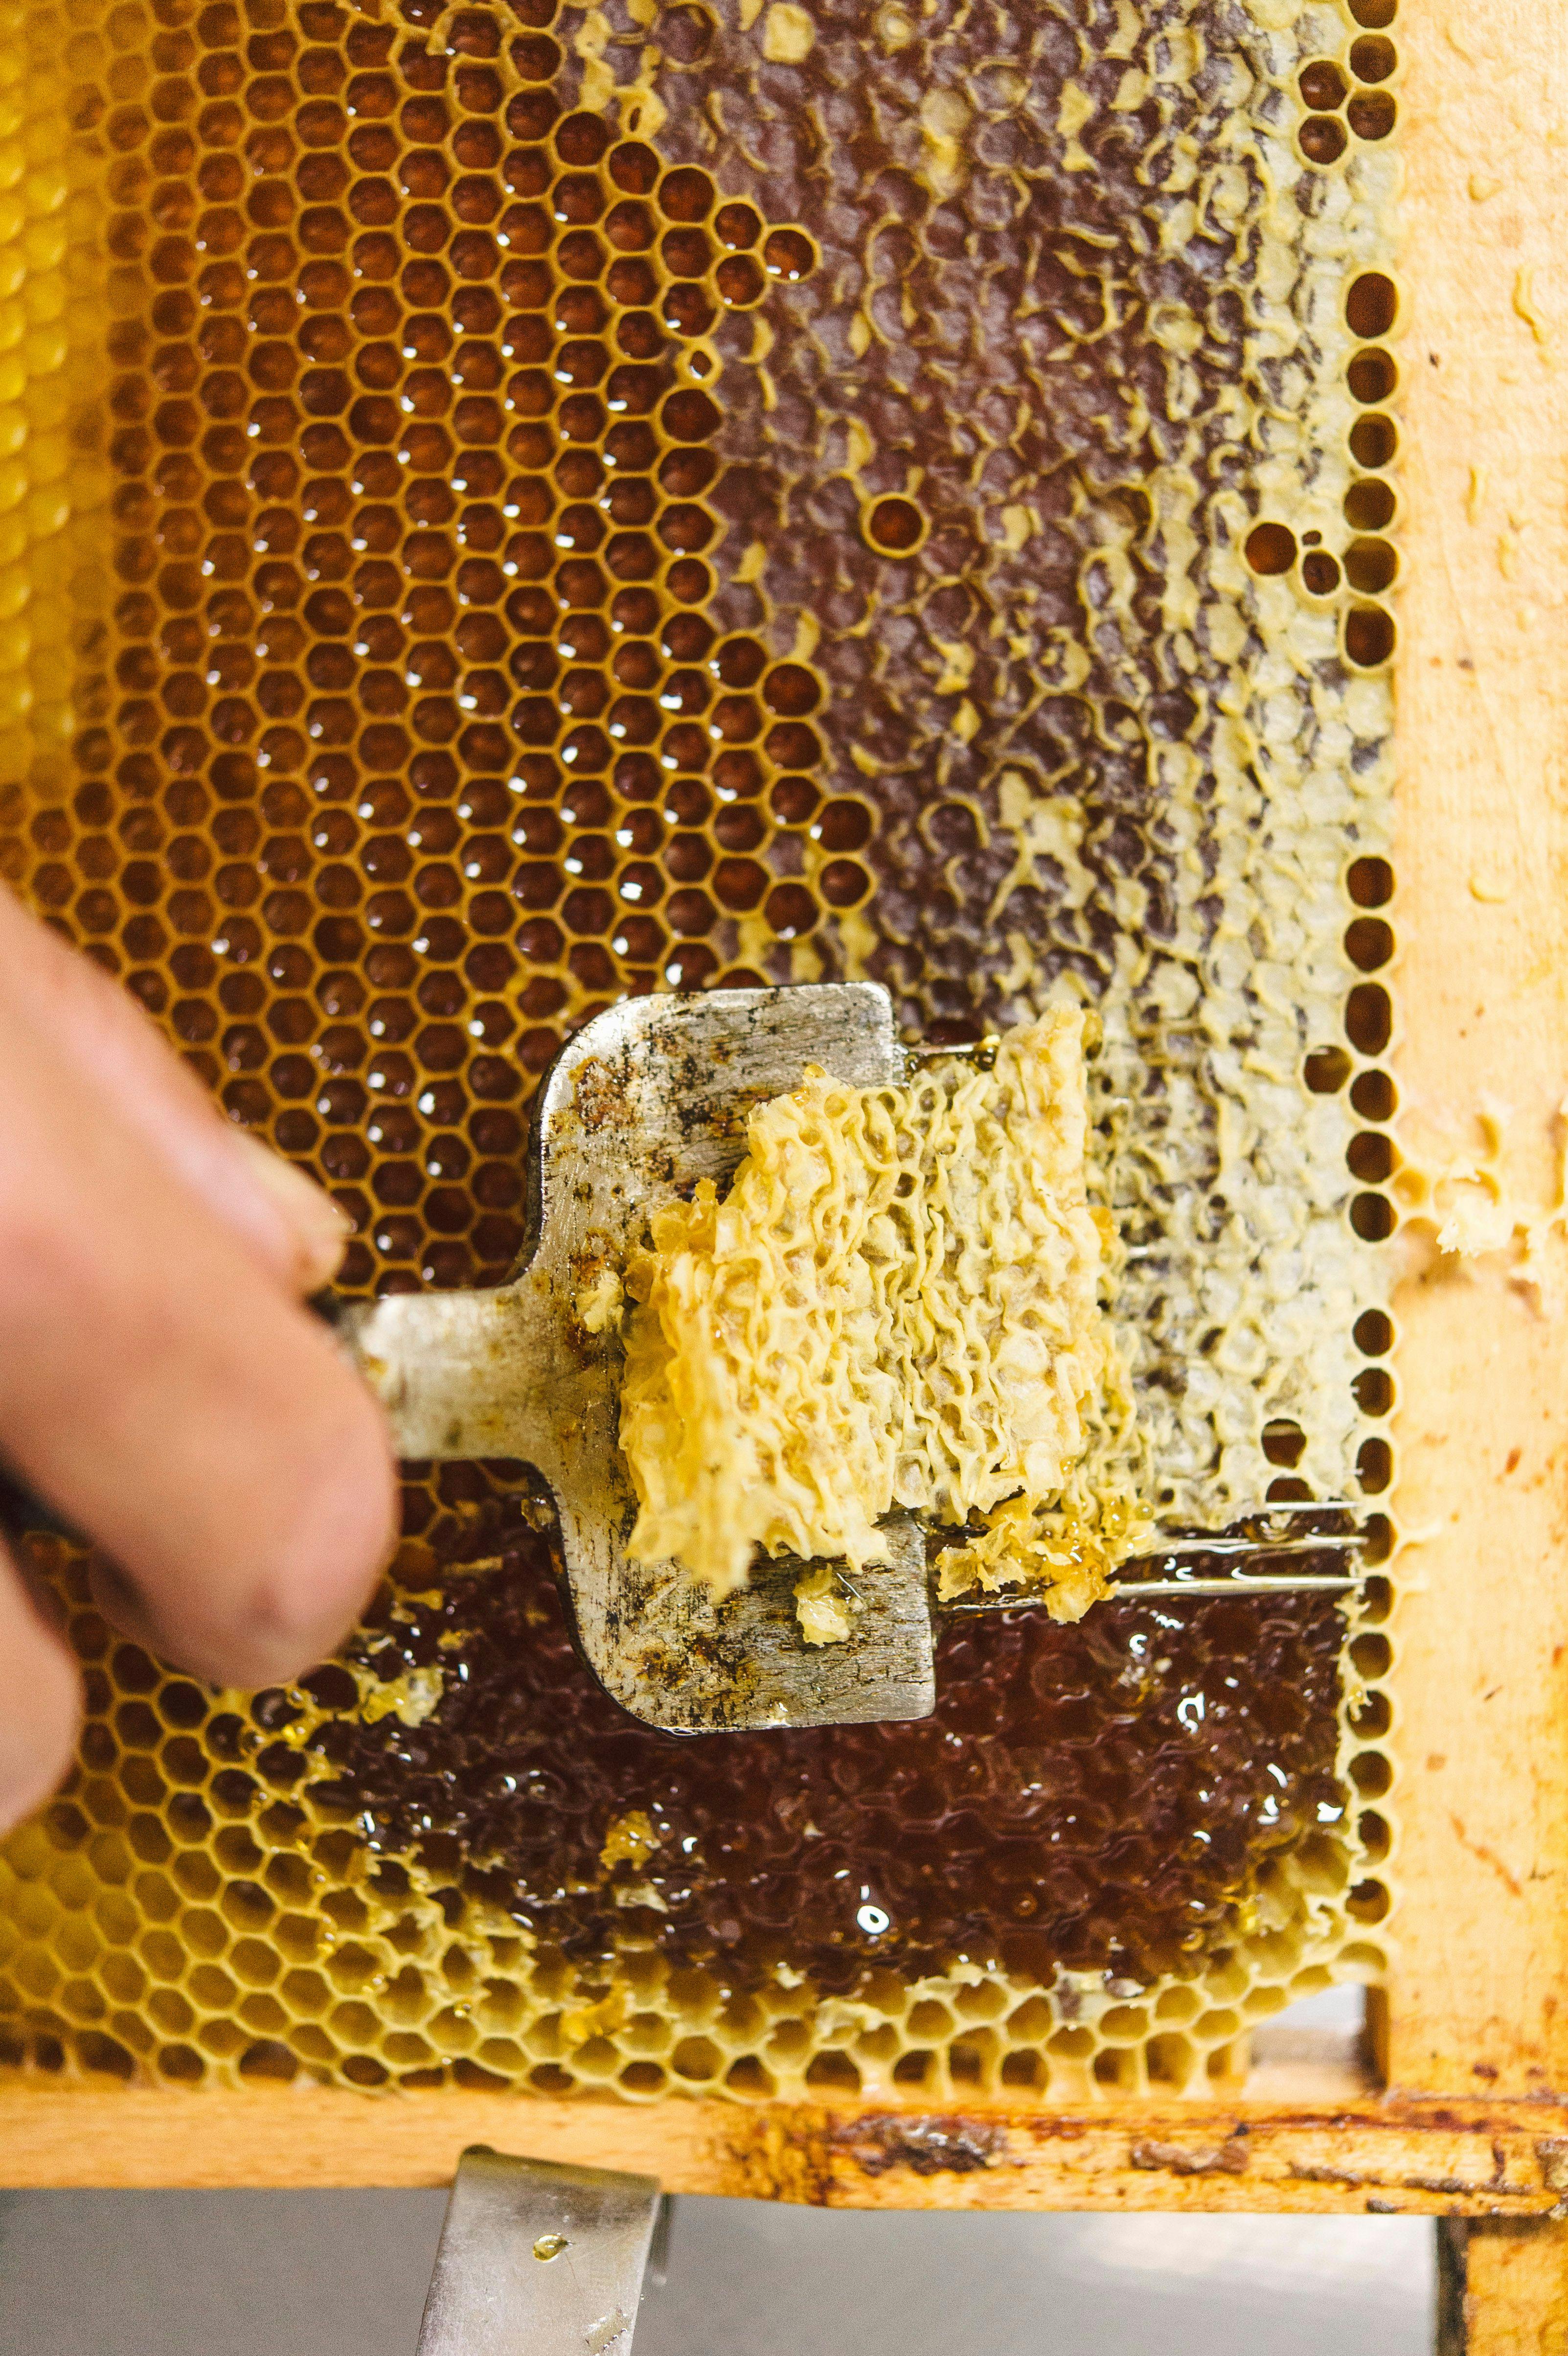 Knocking off the honeycomb